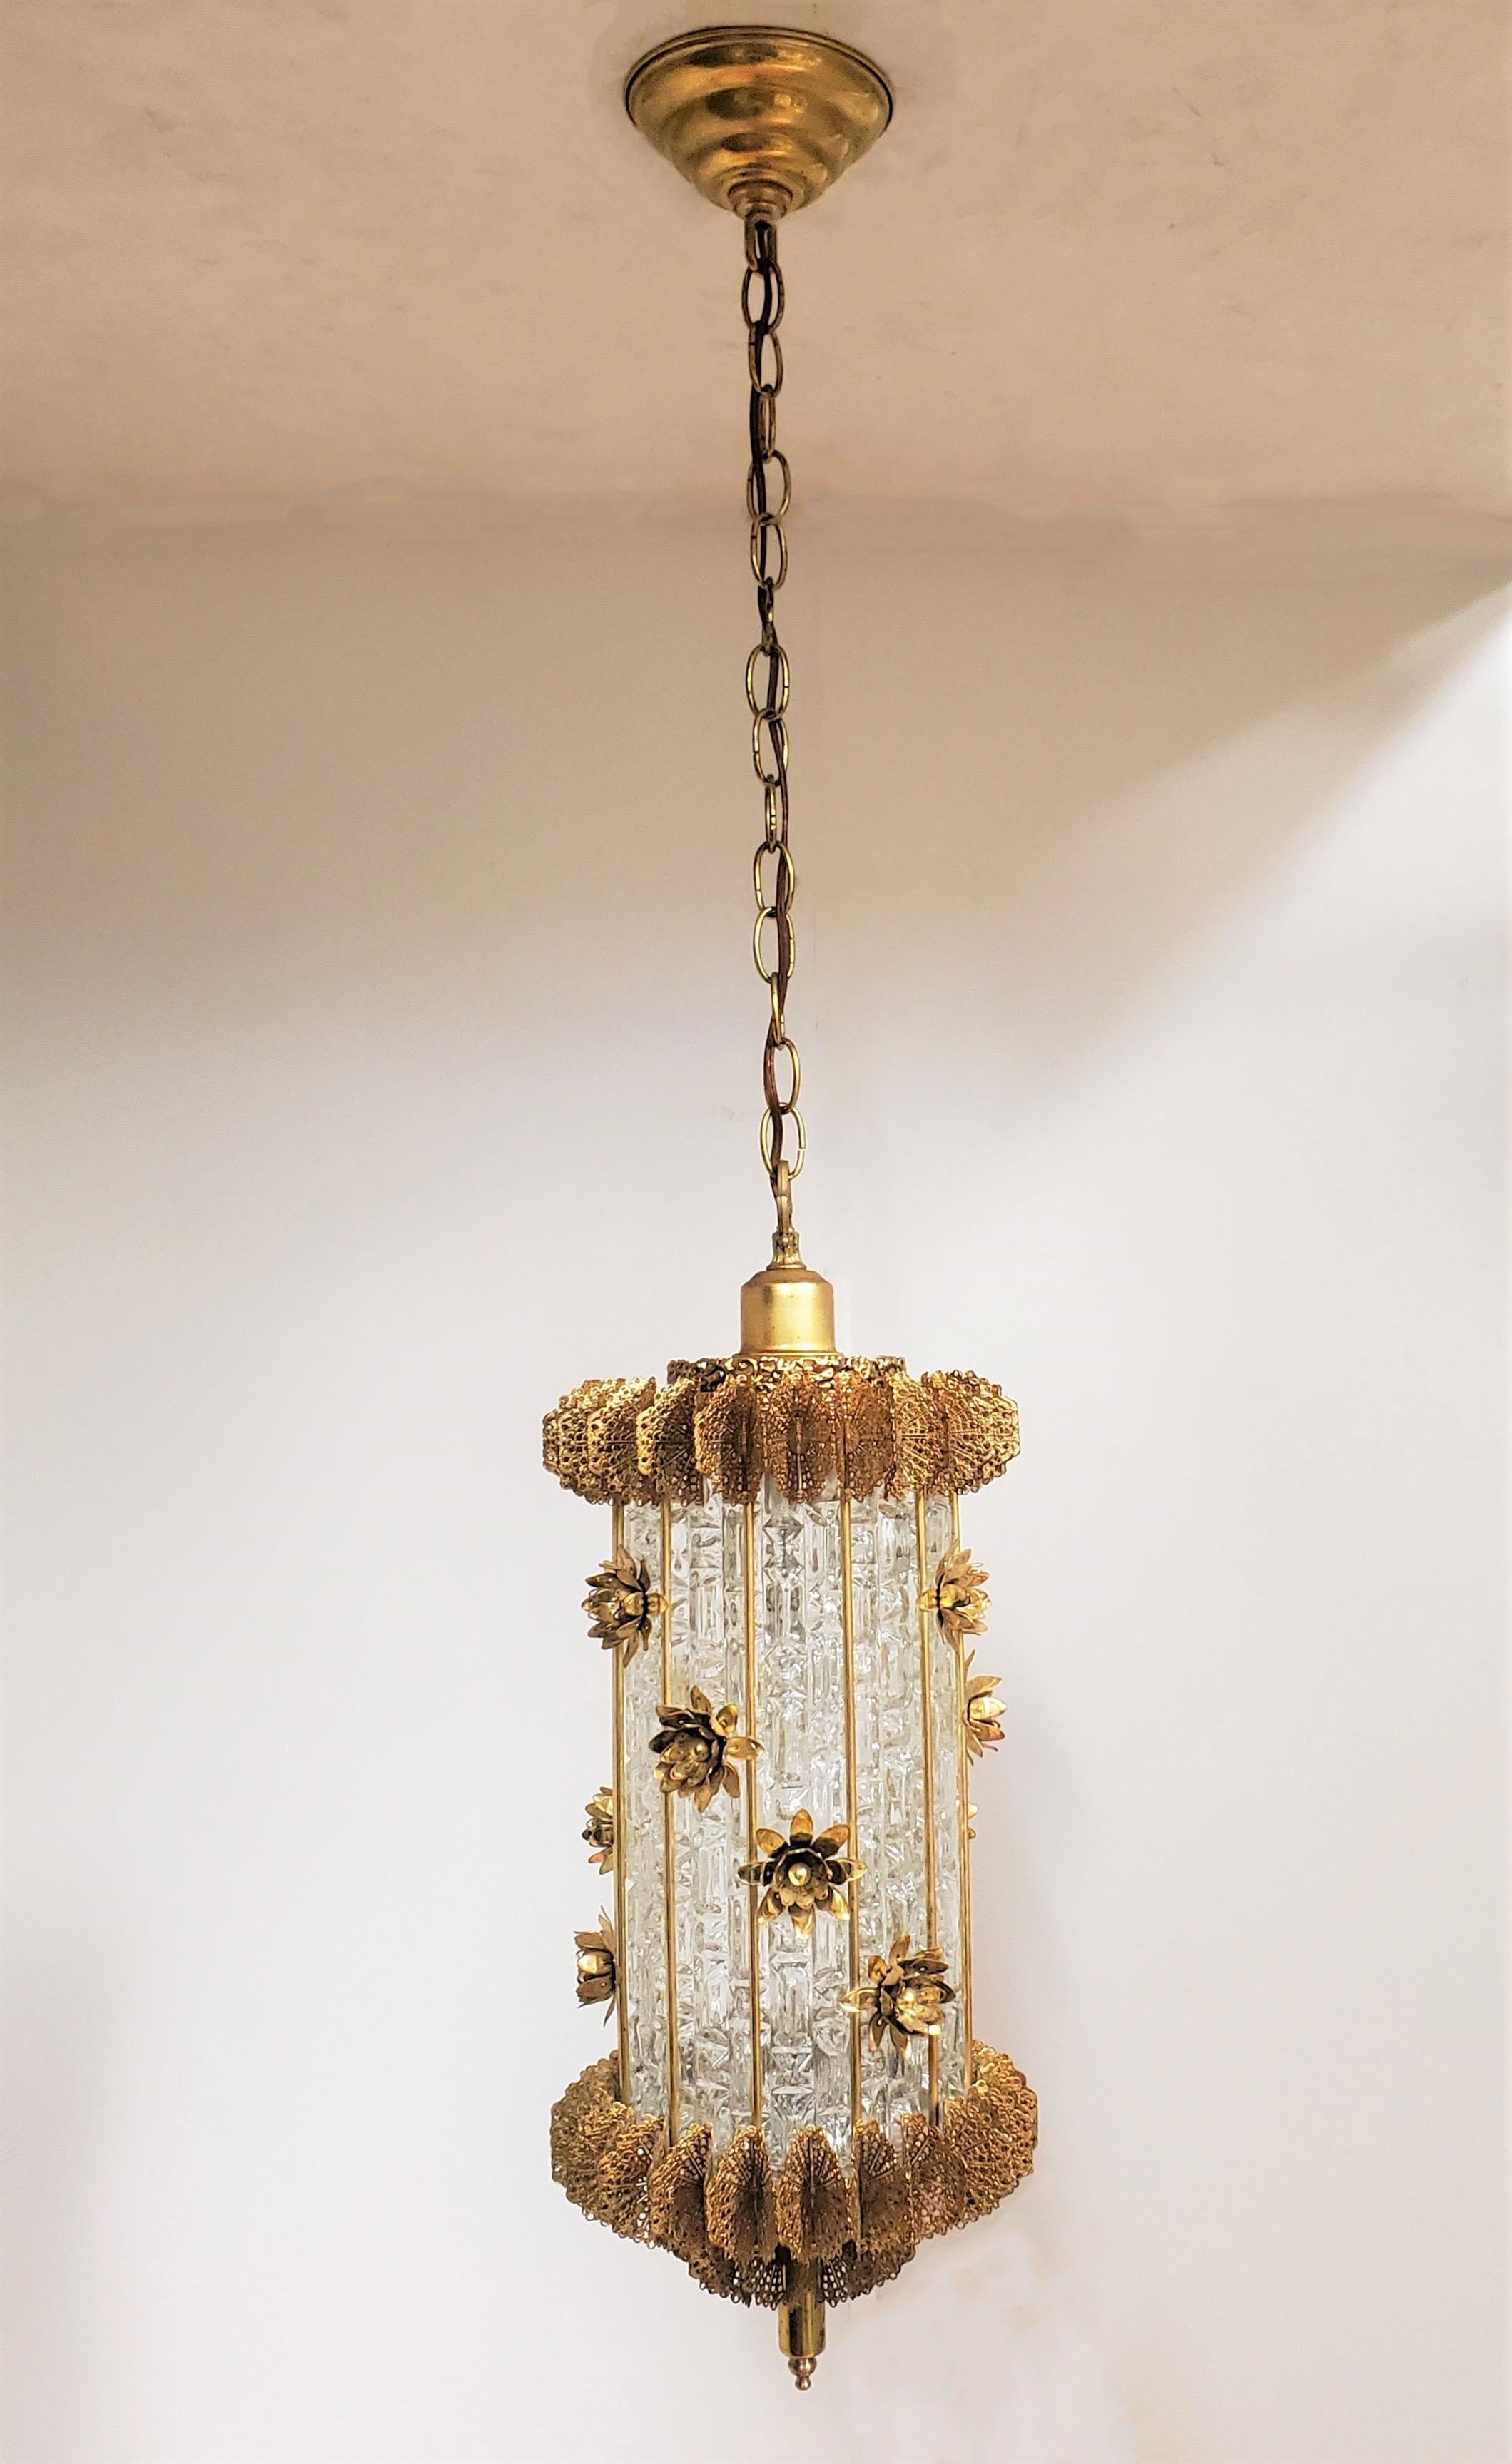 An unusual lantern style hanging fixture characterized by open work butterfly wings resulting in a pierced, netlike fringe which decorates the top and bottom circumference of this cylindrical chandelier like a crown. Blossoming flowers adorn the